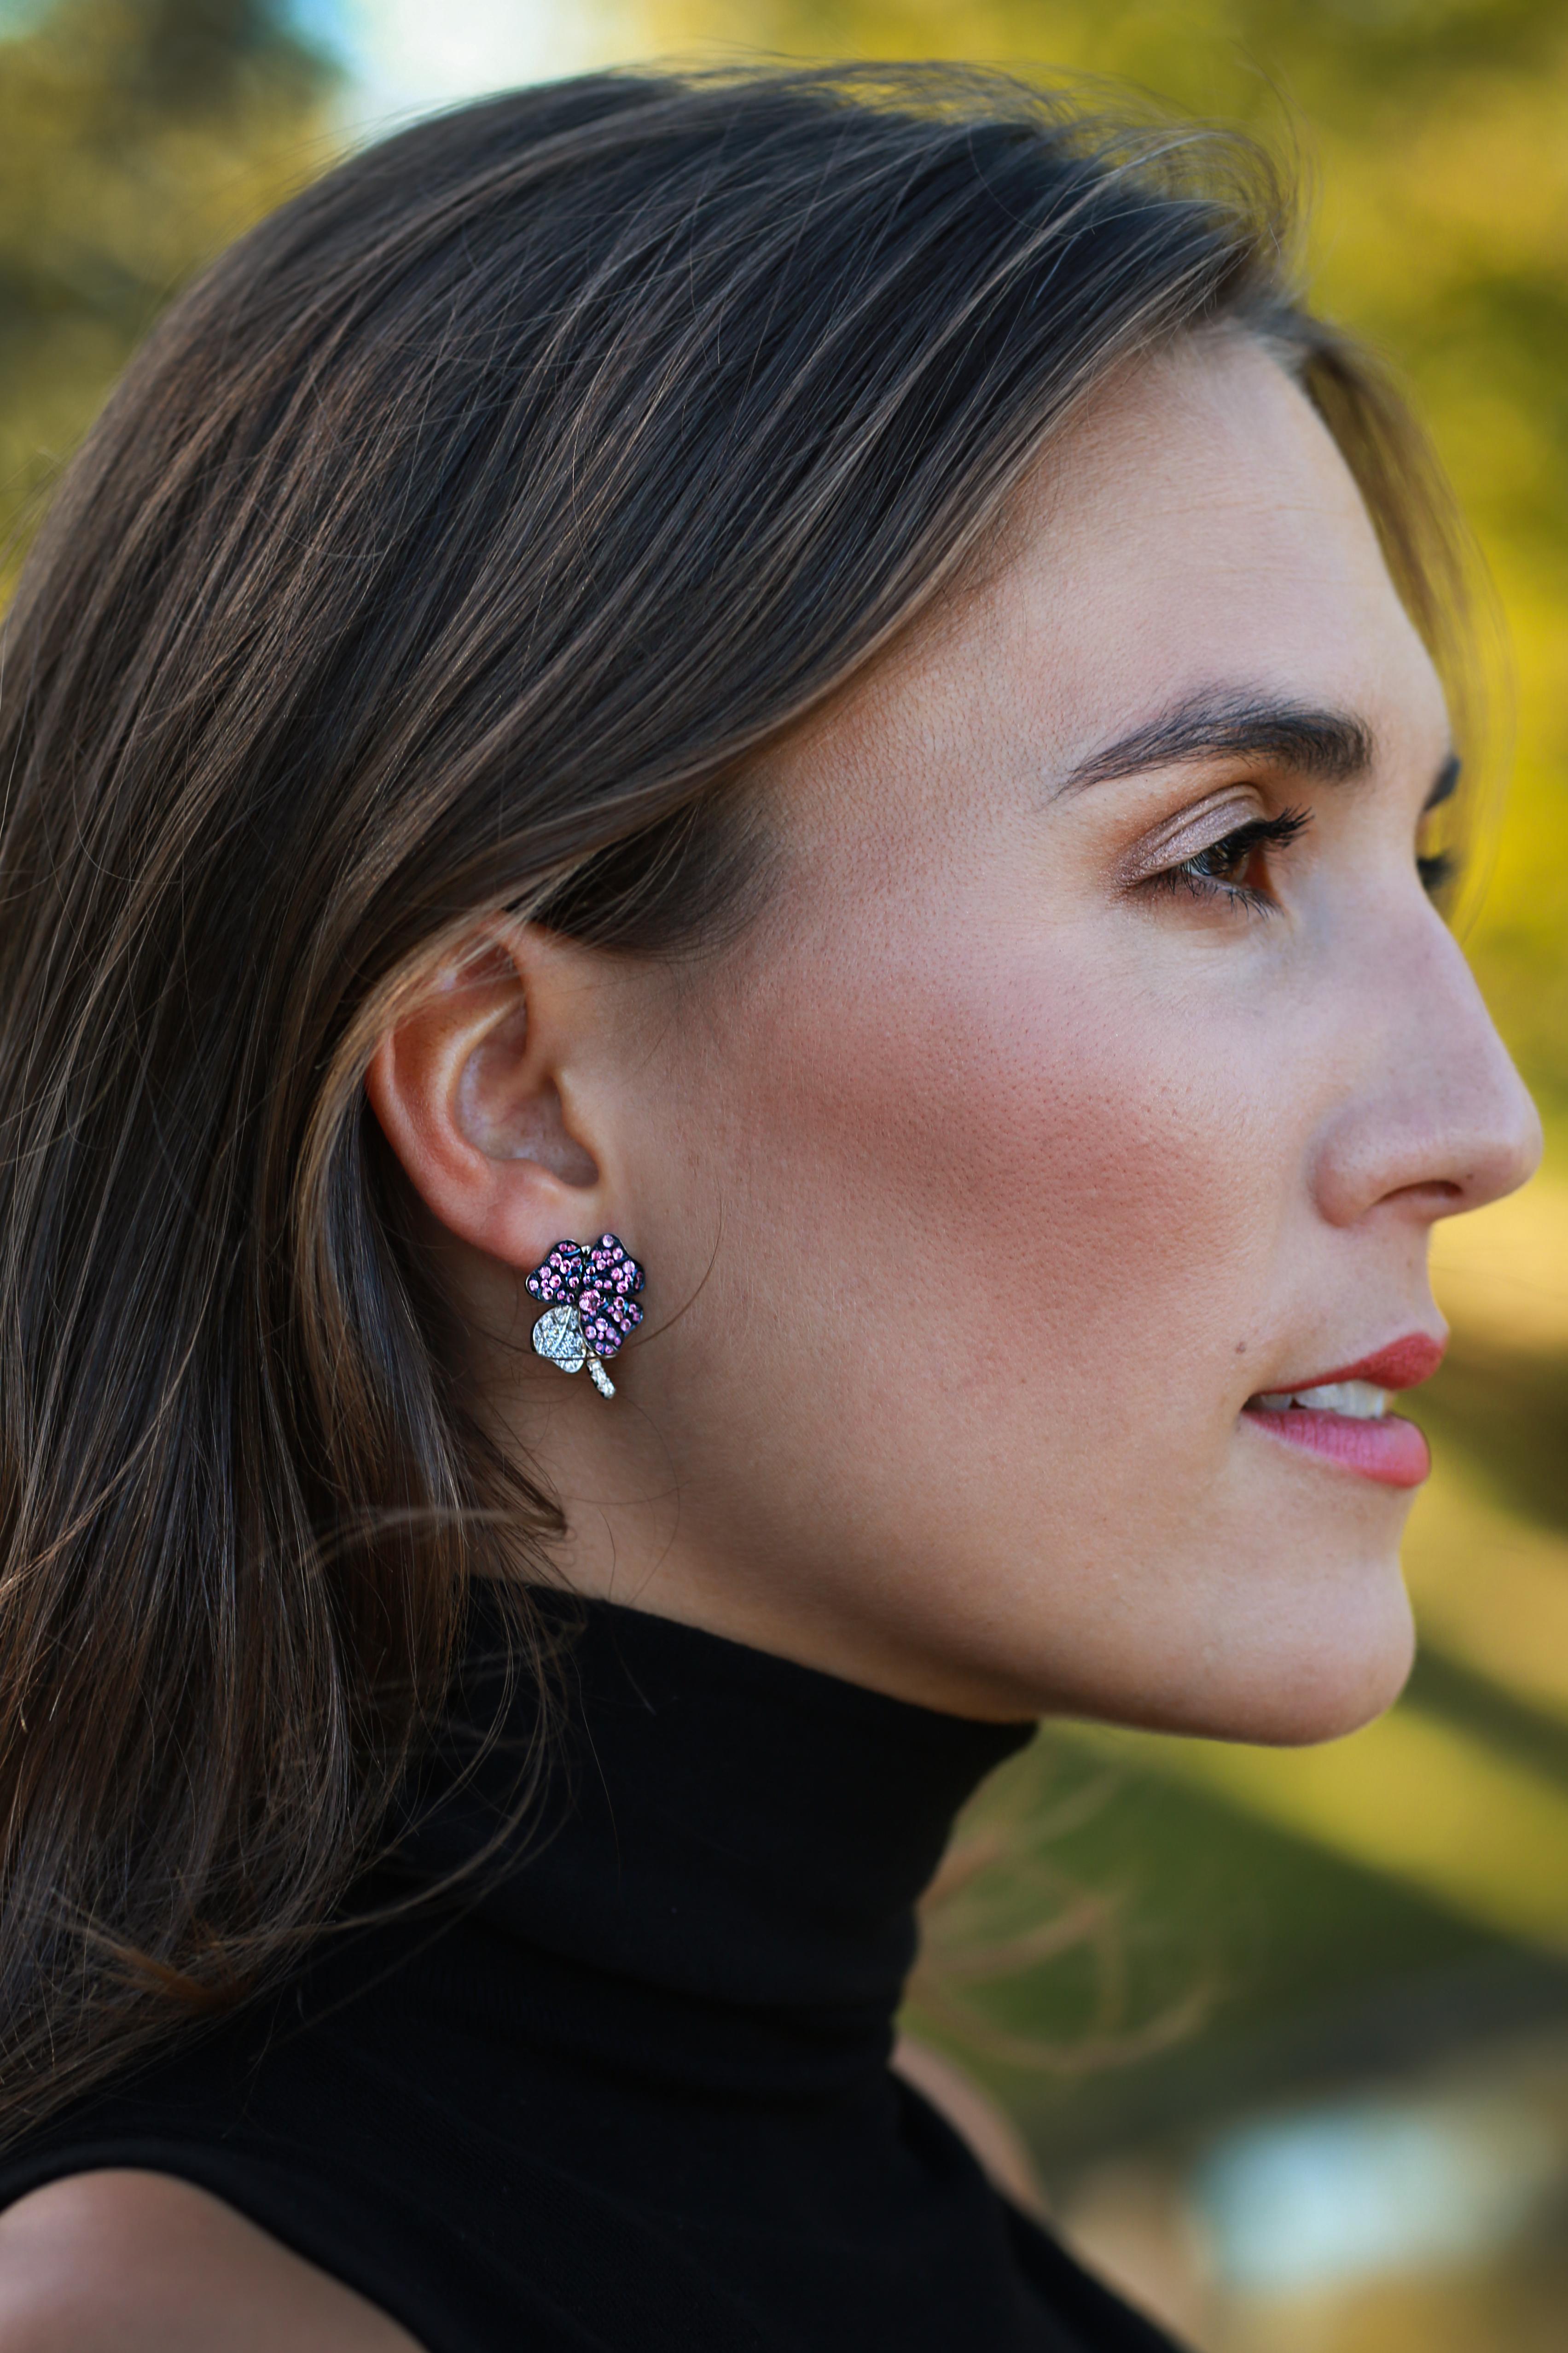 Earrings handcrafted in Palladium and 18 k White Gold with Pink Sapphires and White Diamonds

Paving: Pink Sapphires 1,49ct. (96Pcs.); White Diamonds 0,44ct
Material: Palladium 950; White Gold 750; White and Blue Rhodium 

Ring can be handcrafted in